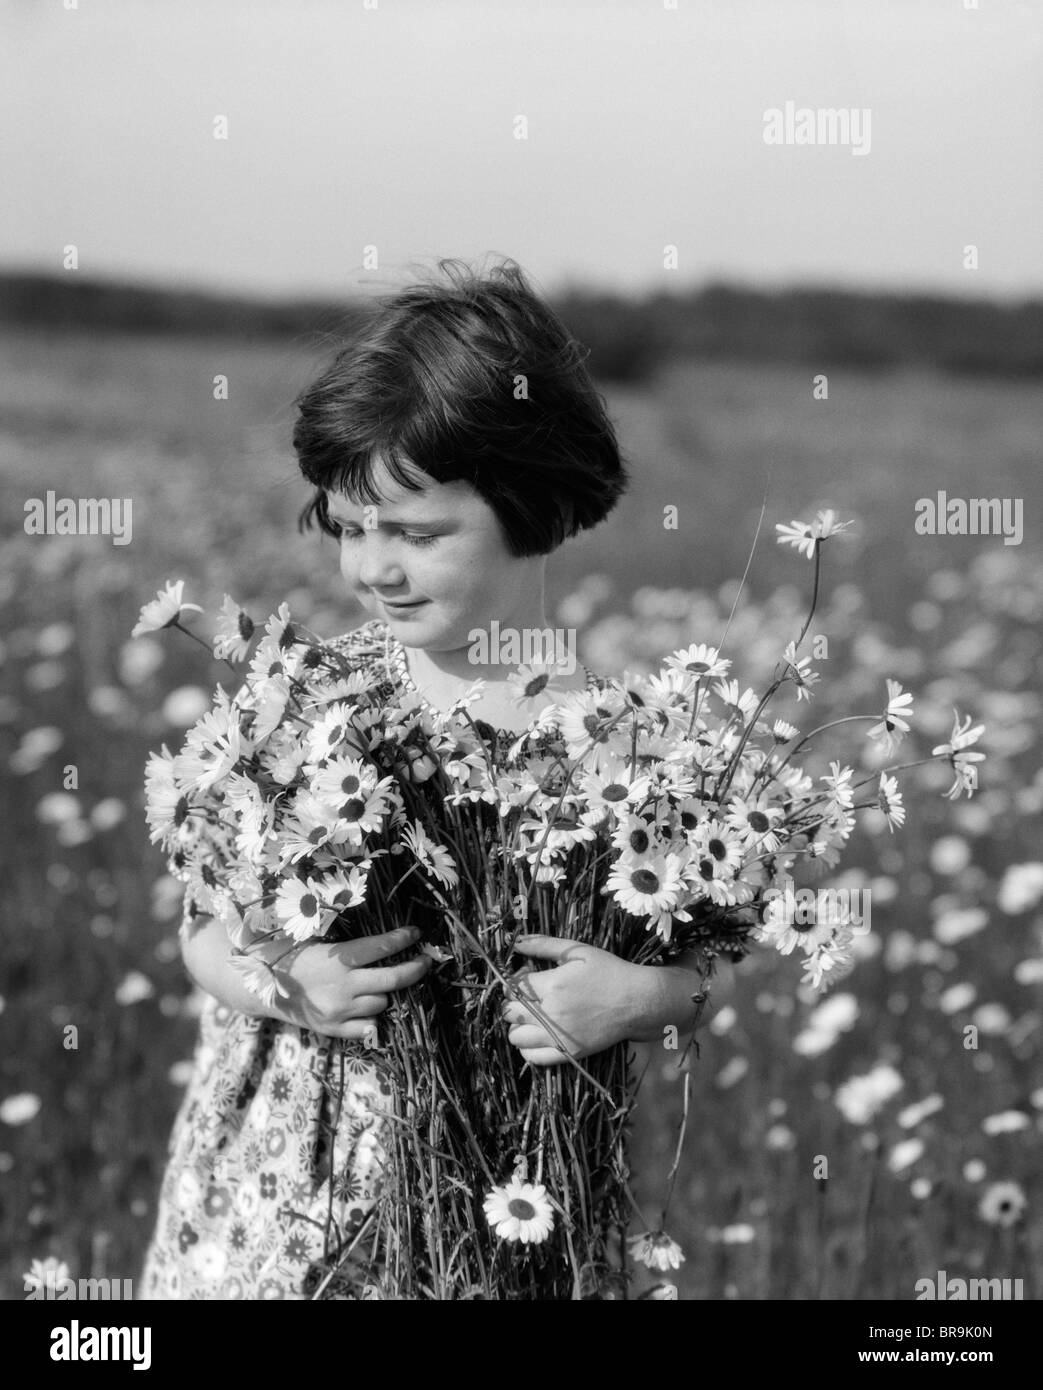 1920s GIRL IN MEADOW HOLDING BUNCH OF DAISIES Stock Photo